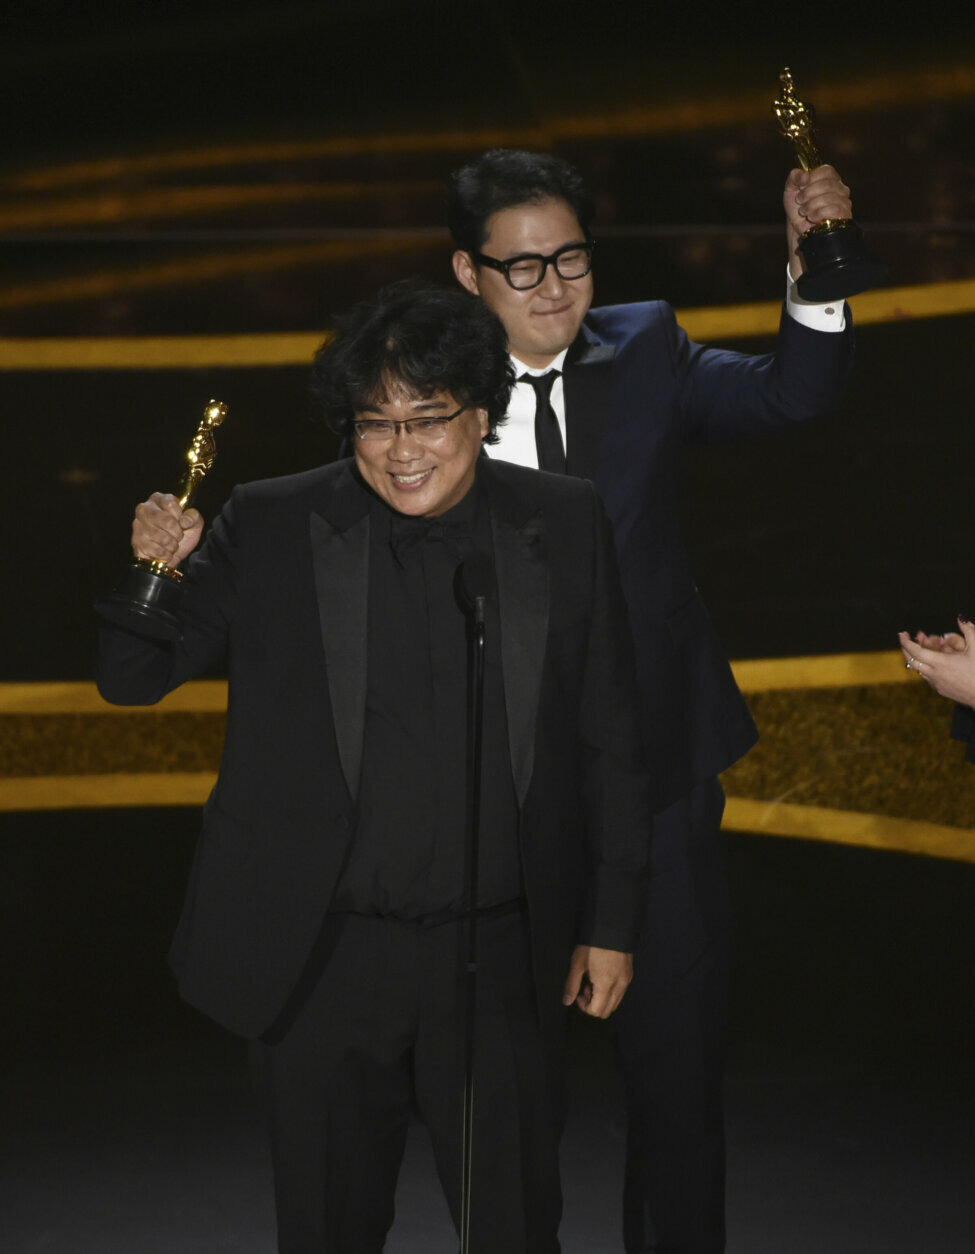 Bong Joon Ho, left, and Han Jin Won accept the award for best original screenplay for "Parasite" at the Oscars on Sunday, Feb. 9, 2020, at the Dolby Theatre in Los Angeles. (AP Photo/Chris Pizzello)